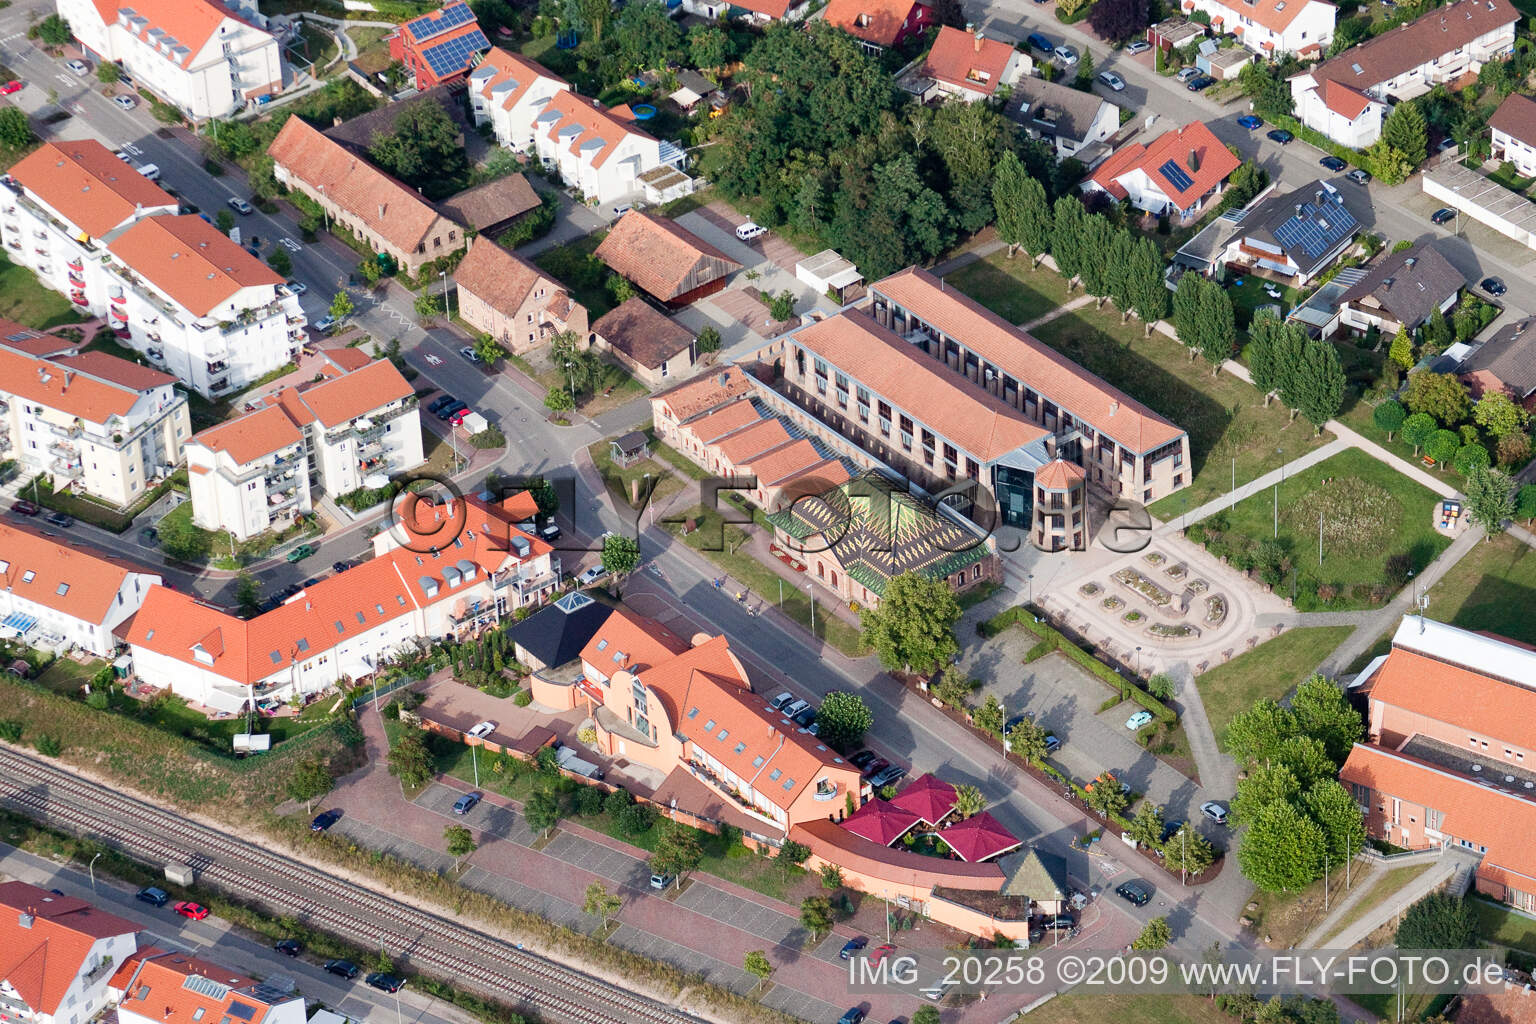 Aerial view of Brickworks Museum in Jockgrim in the state Rhineland-Palatinate, Germany